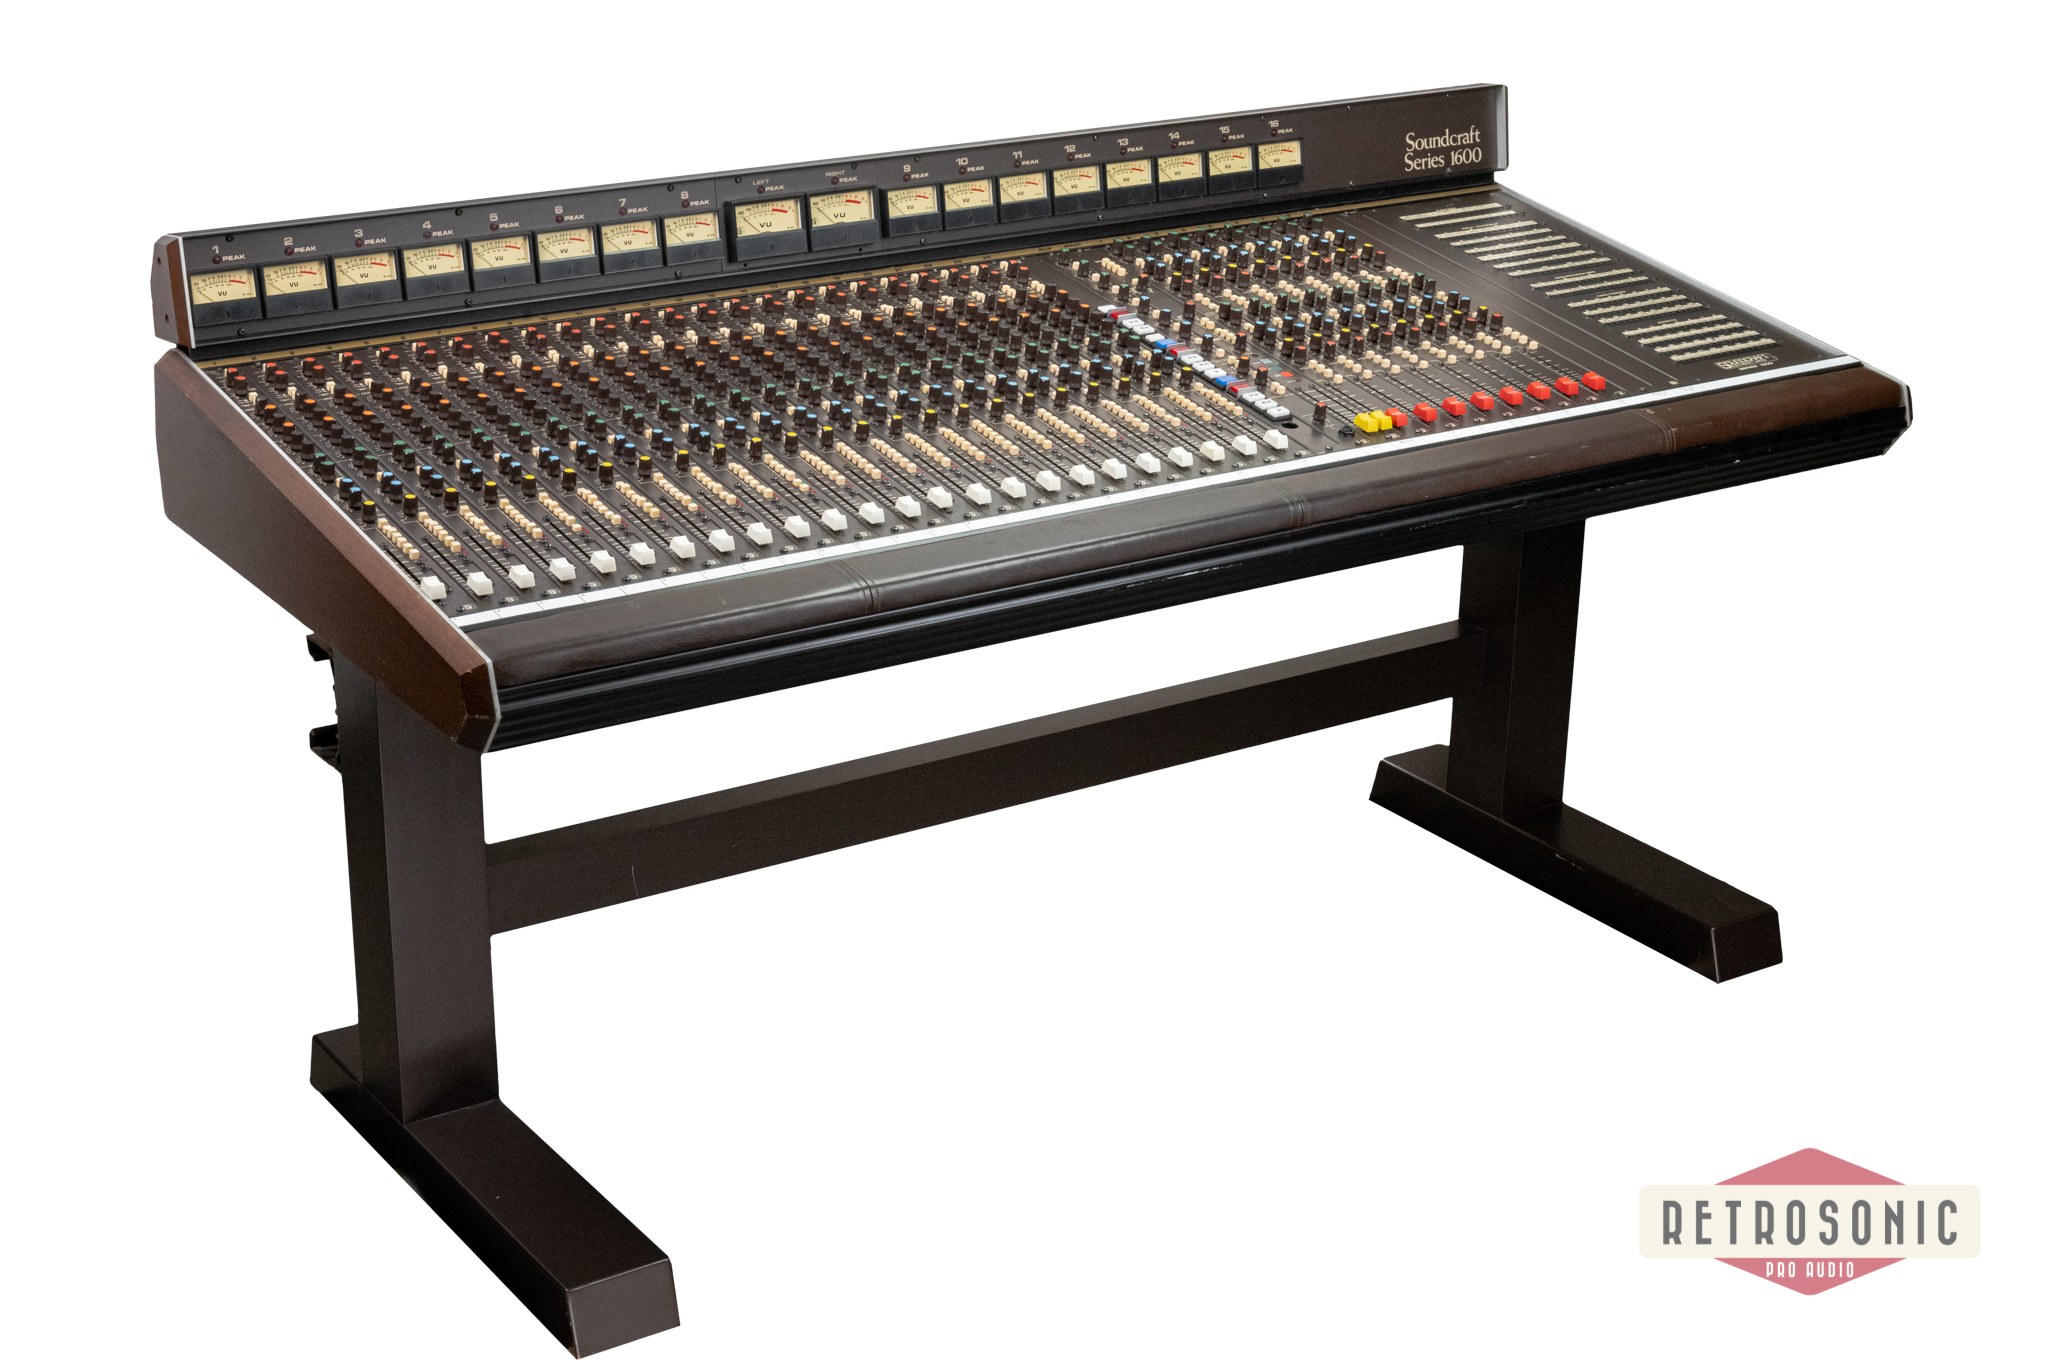 Soundcraft Series 1600 24/8/16 Producer Analog Mixing console